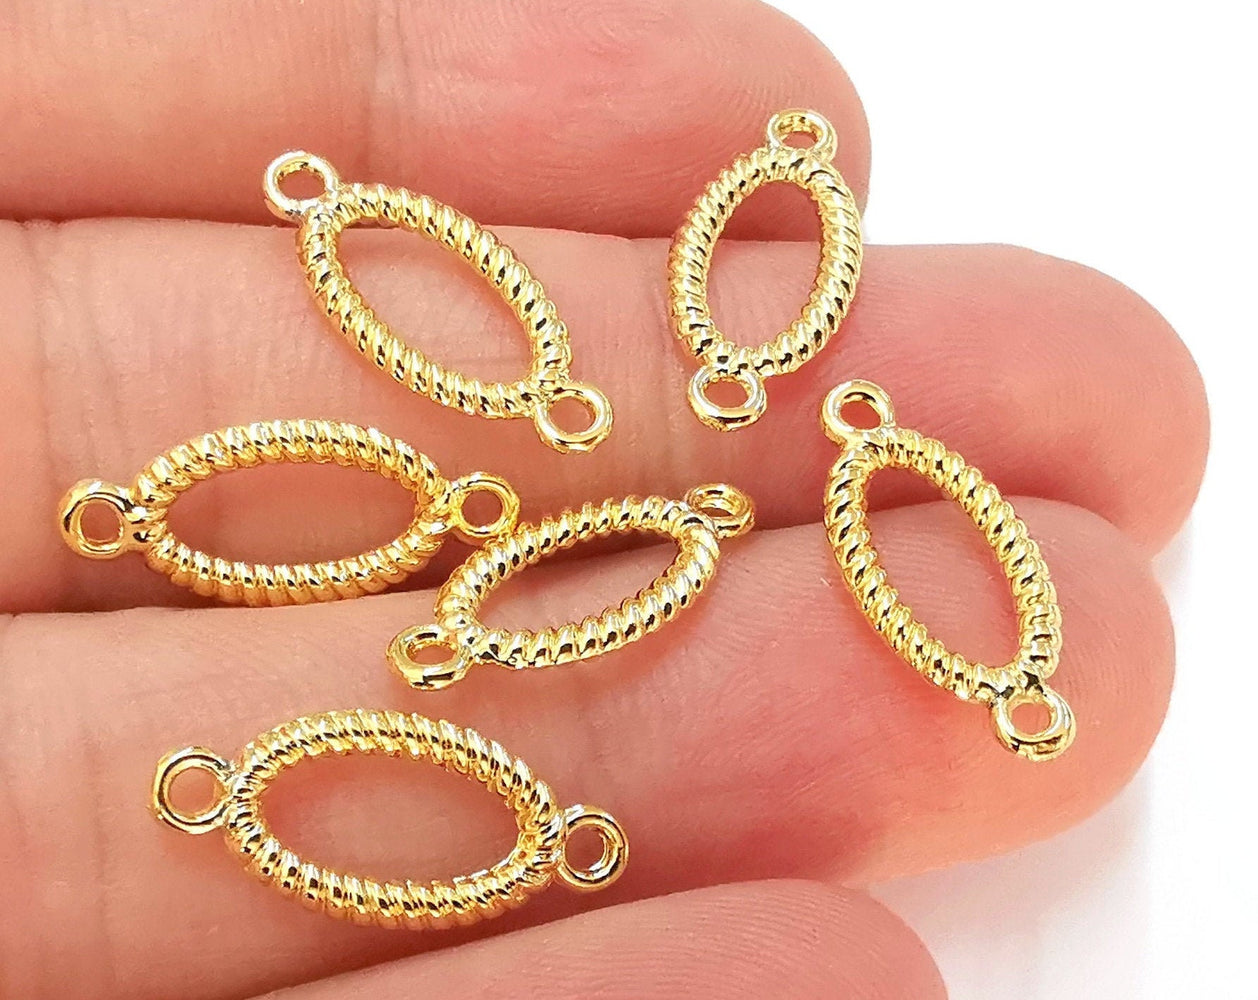 10 Oval Twisted Charms Connector 24K Shiny Gold Plated Findings (20x9mm)  G22923